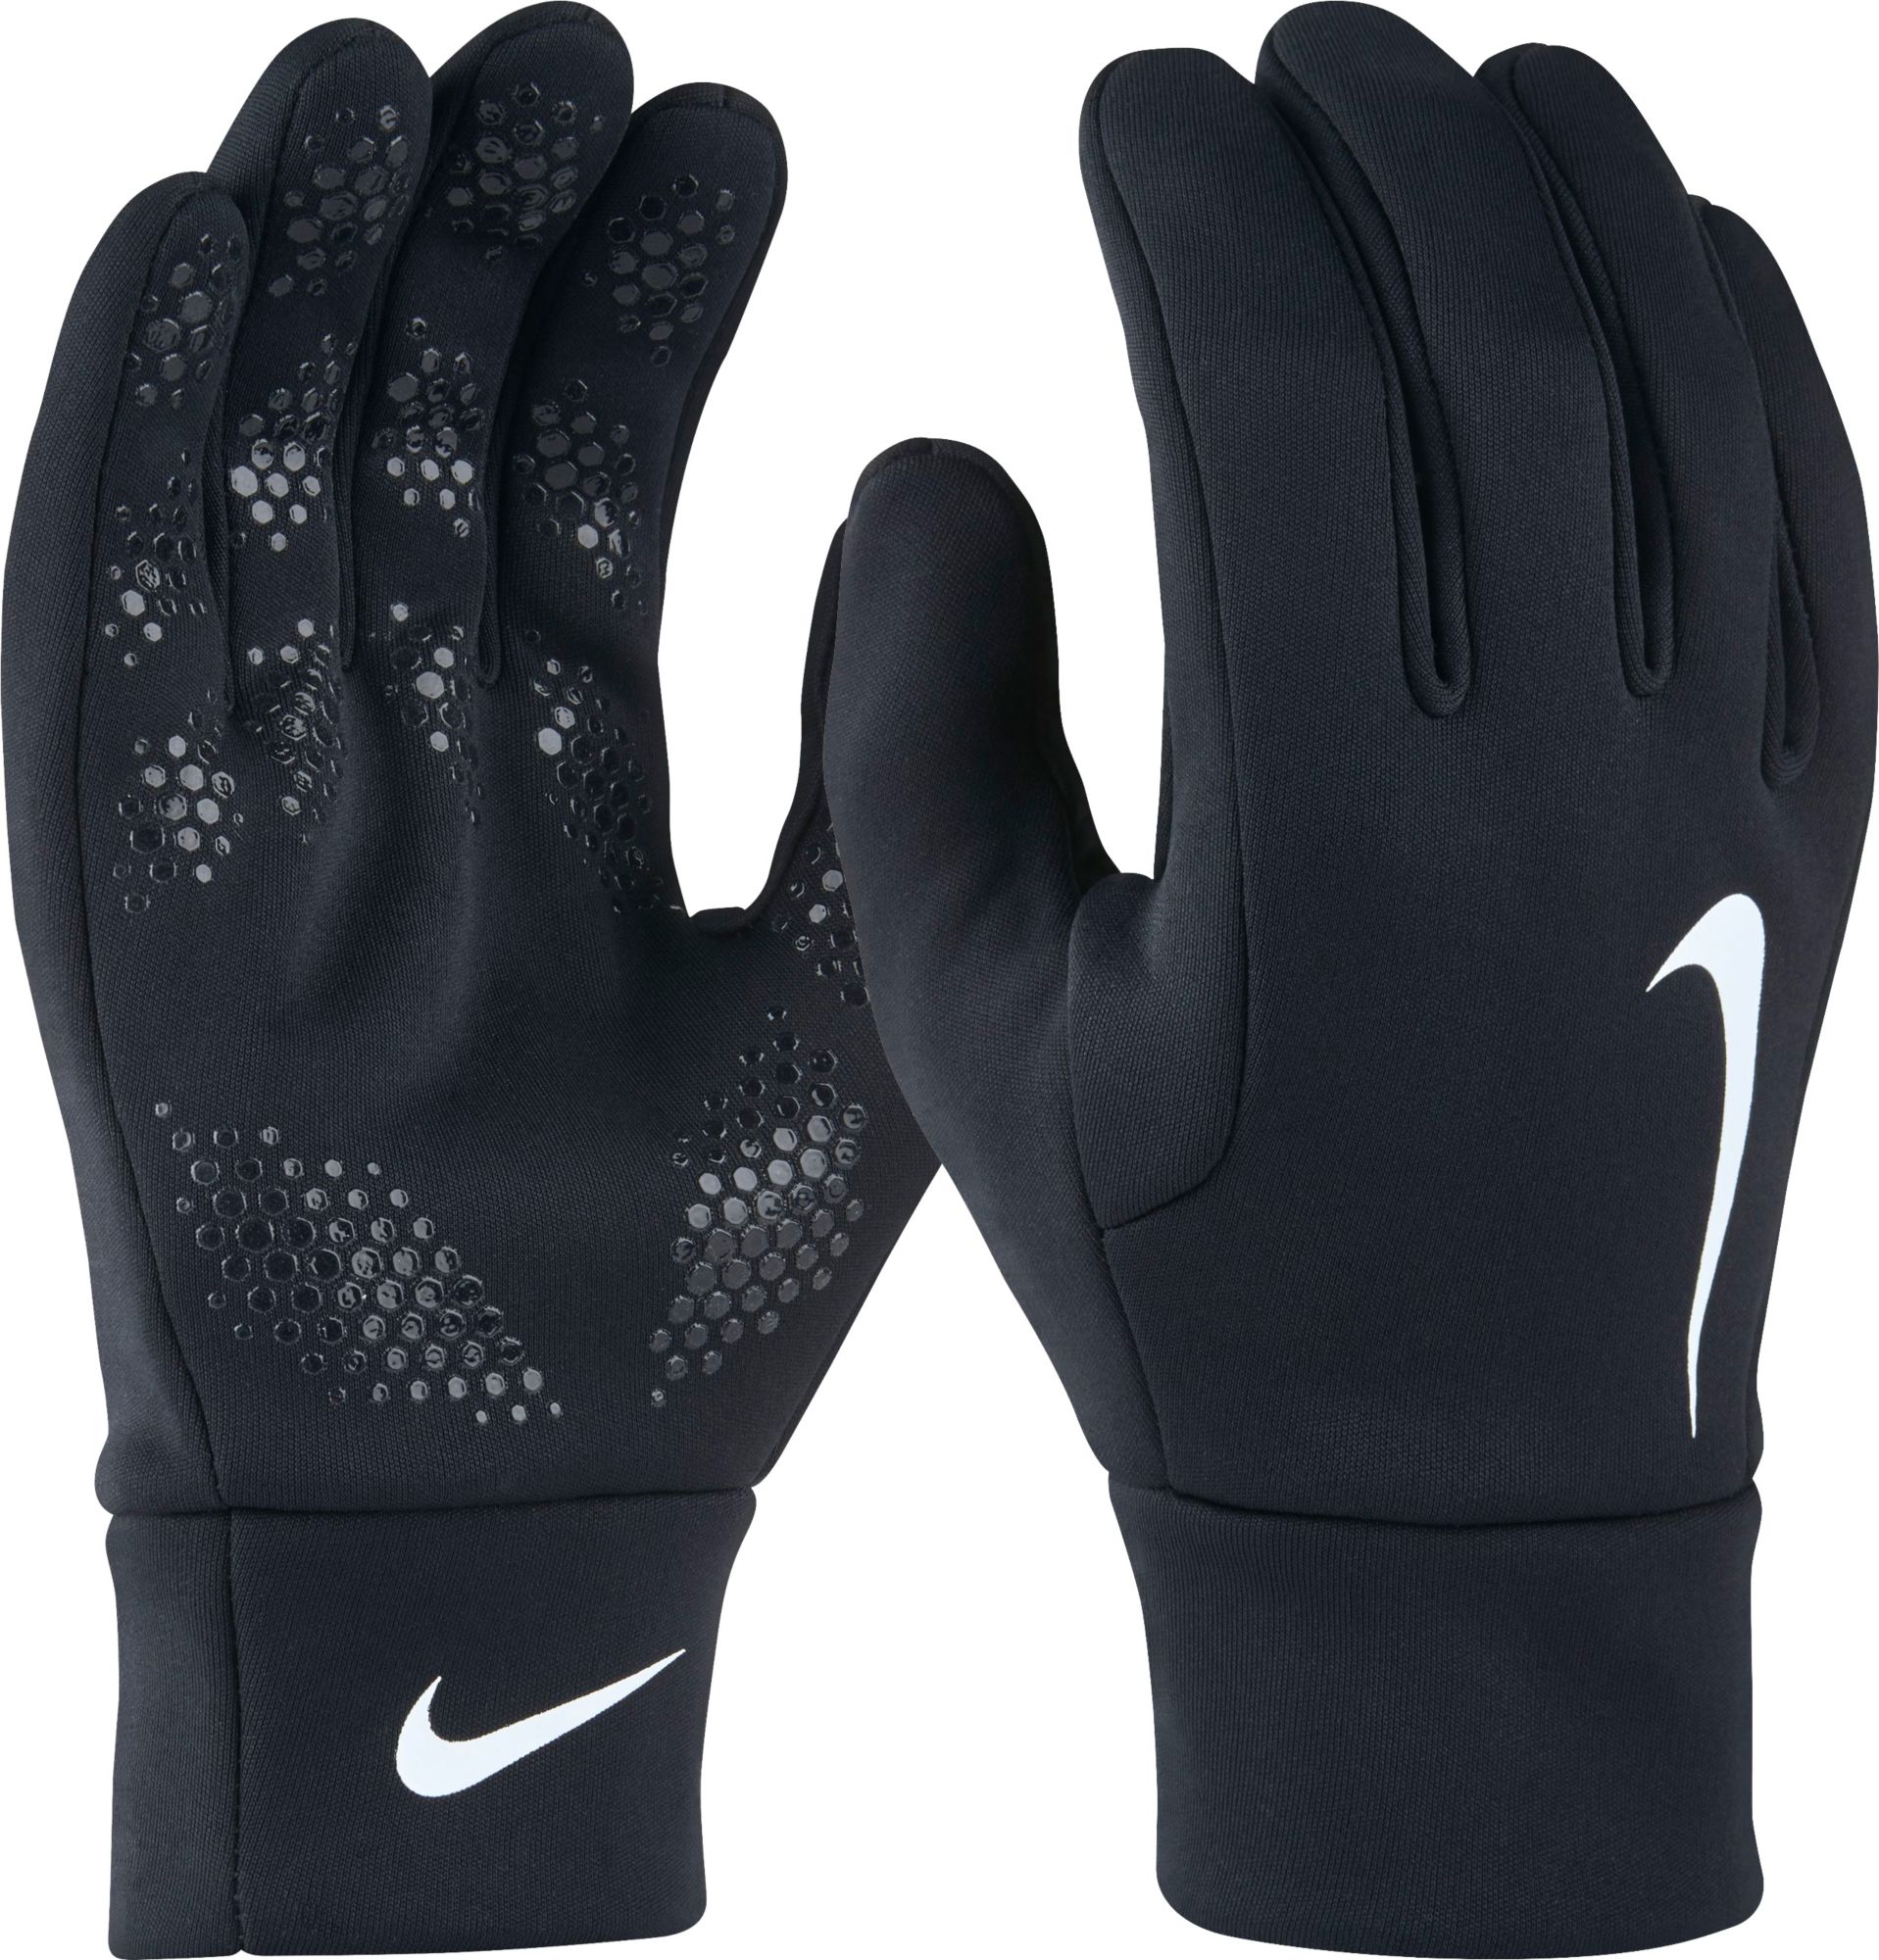 under armour soccer field player gloves